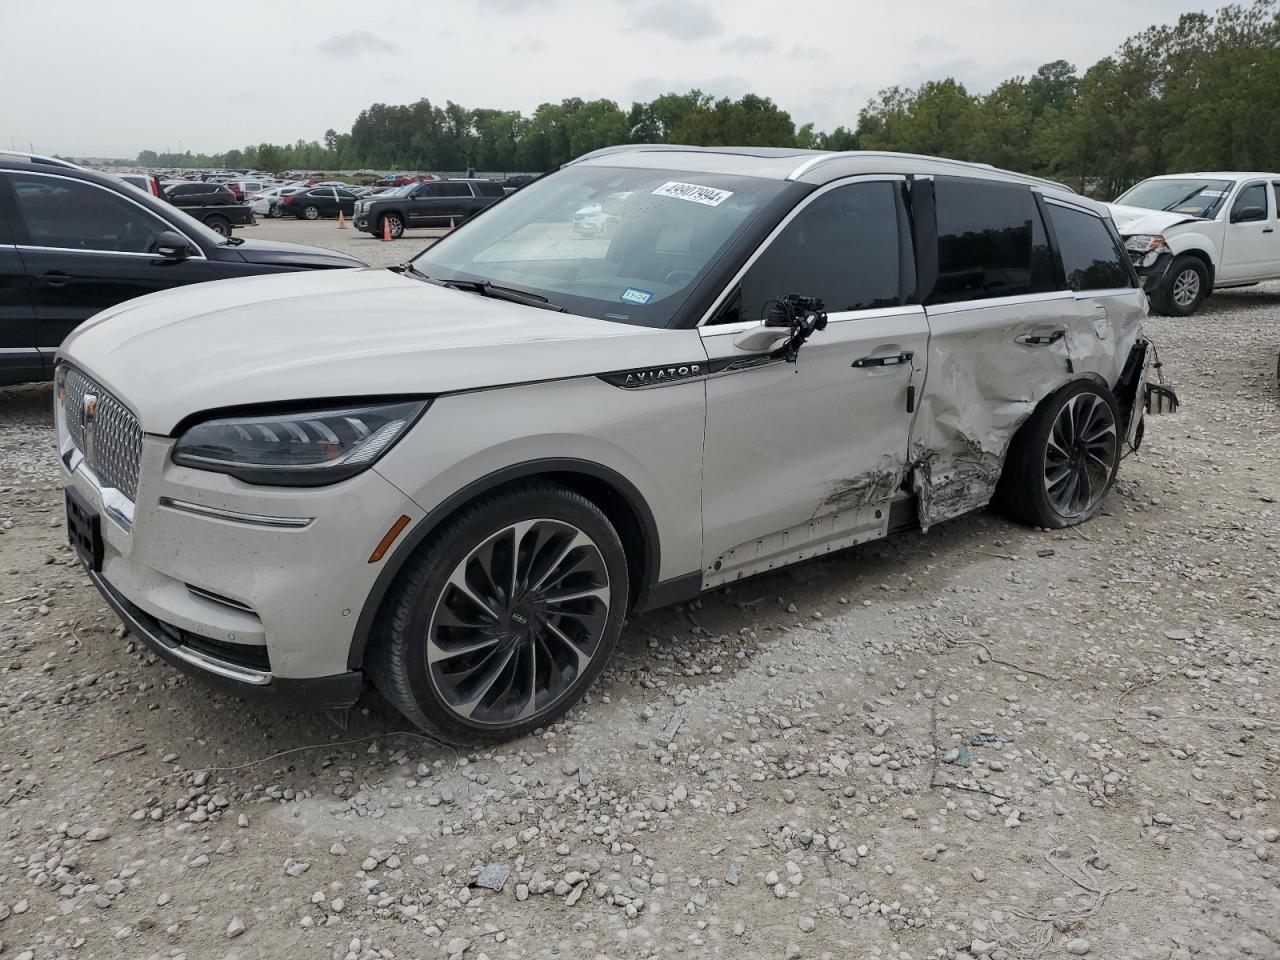 VIN: 5LM5J7WC4NGL04470 - lincoln aviator